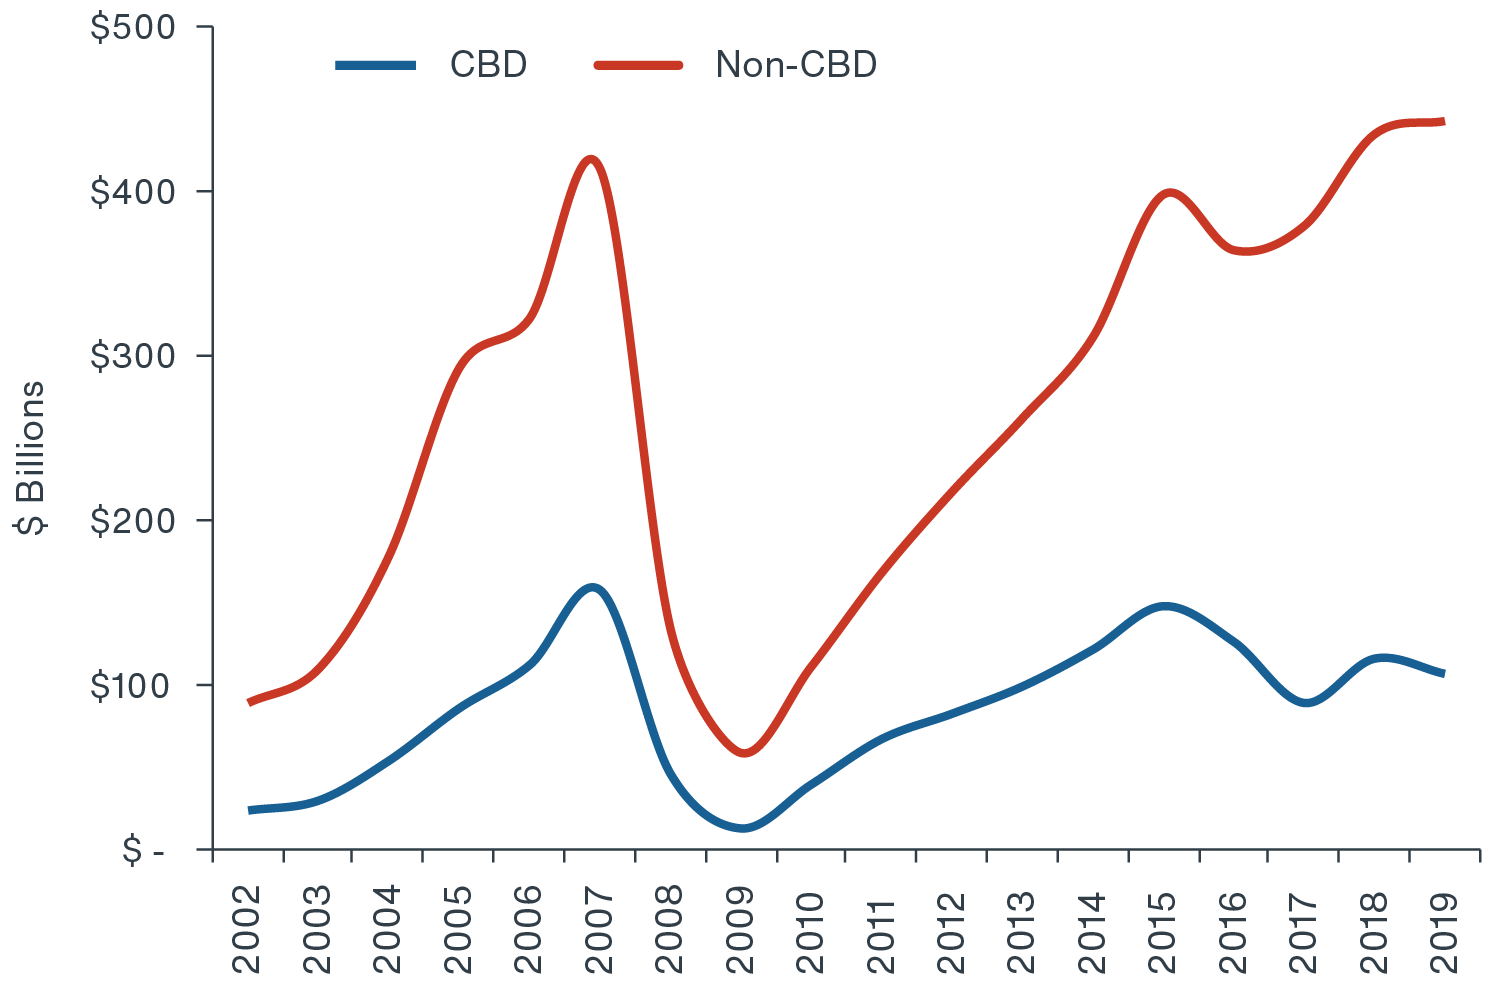 Line graph depicting wide gap between transaction volume in non-CBD areas vs. that of CBD areas